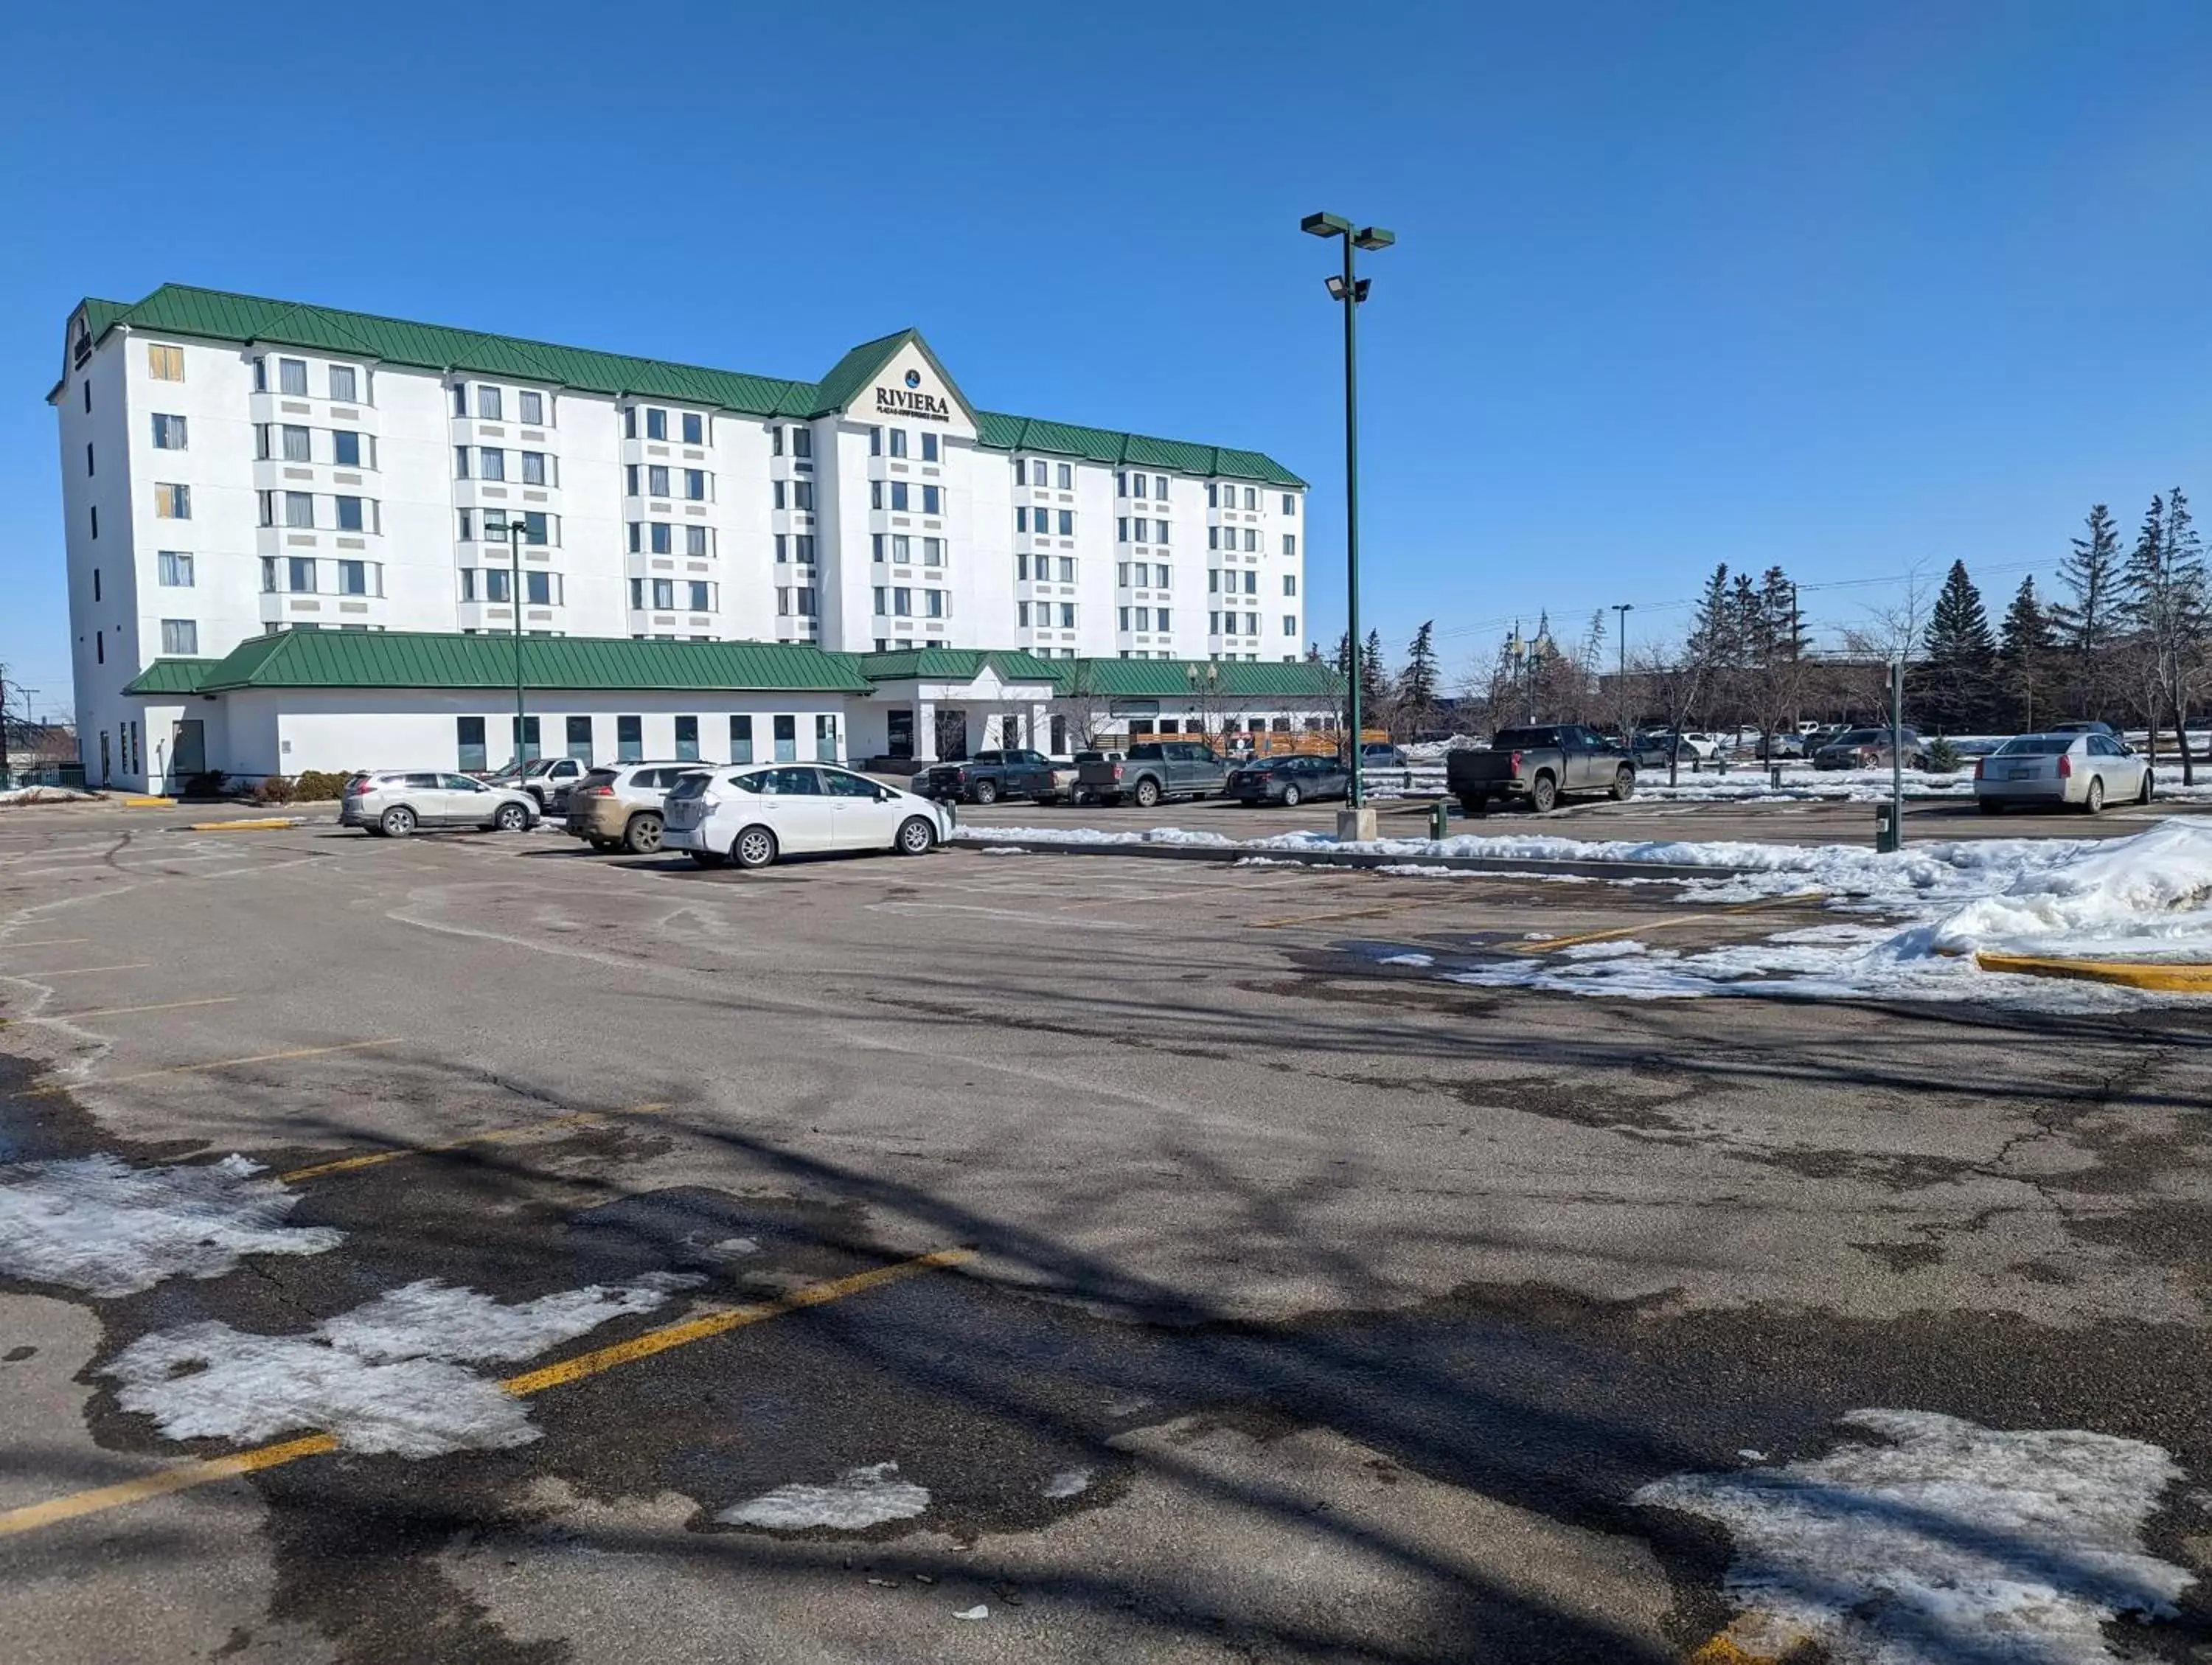 Parking, Property Building in DIVYA SUTRA Riviera Plaza and Conference Centre Calgary Airport